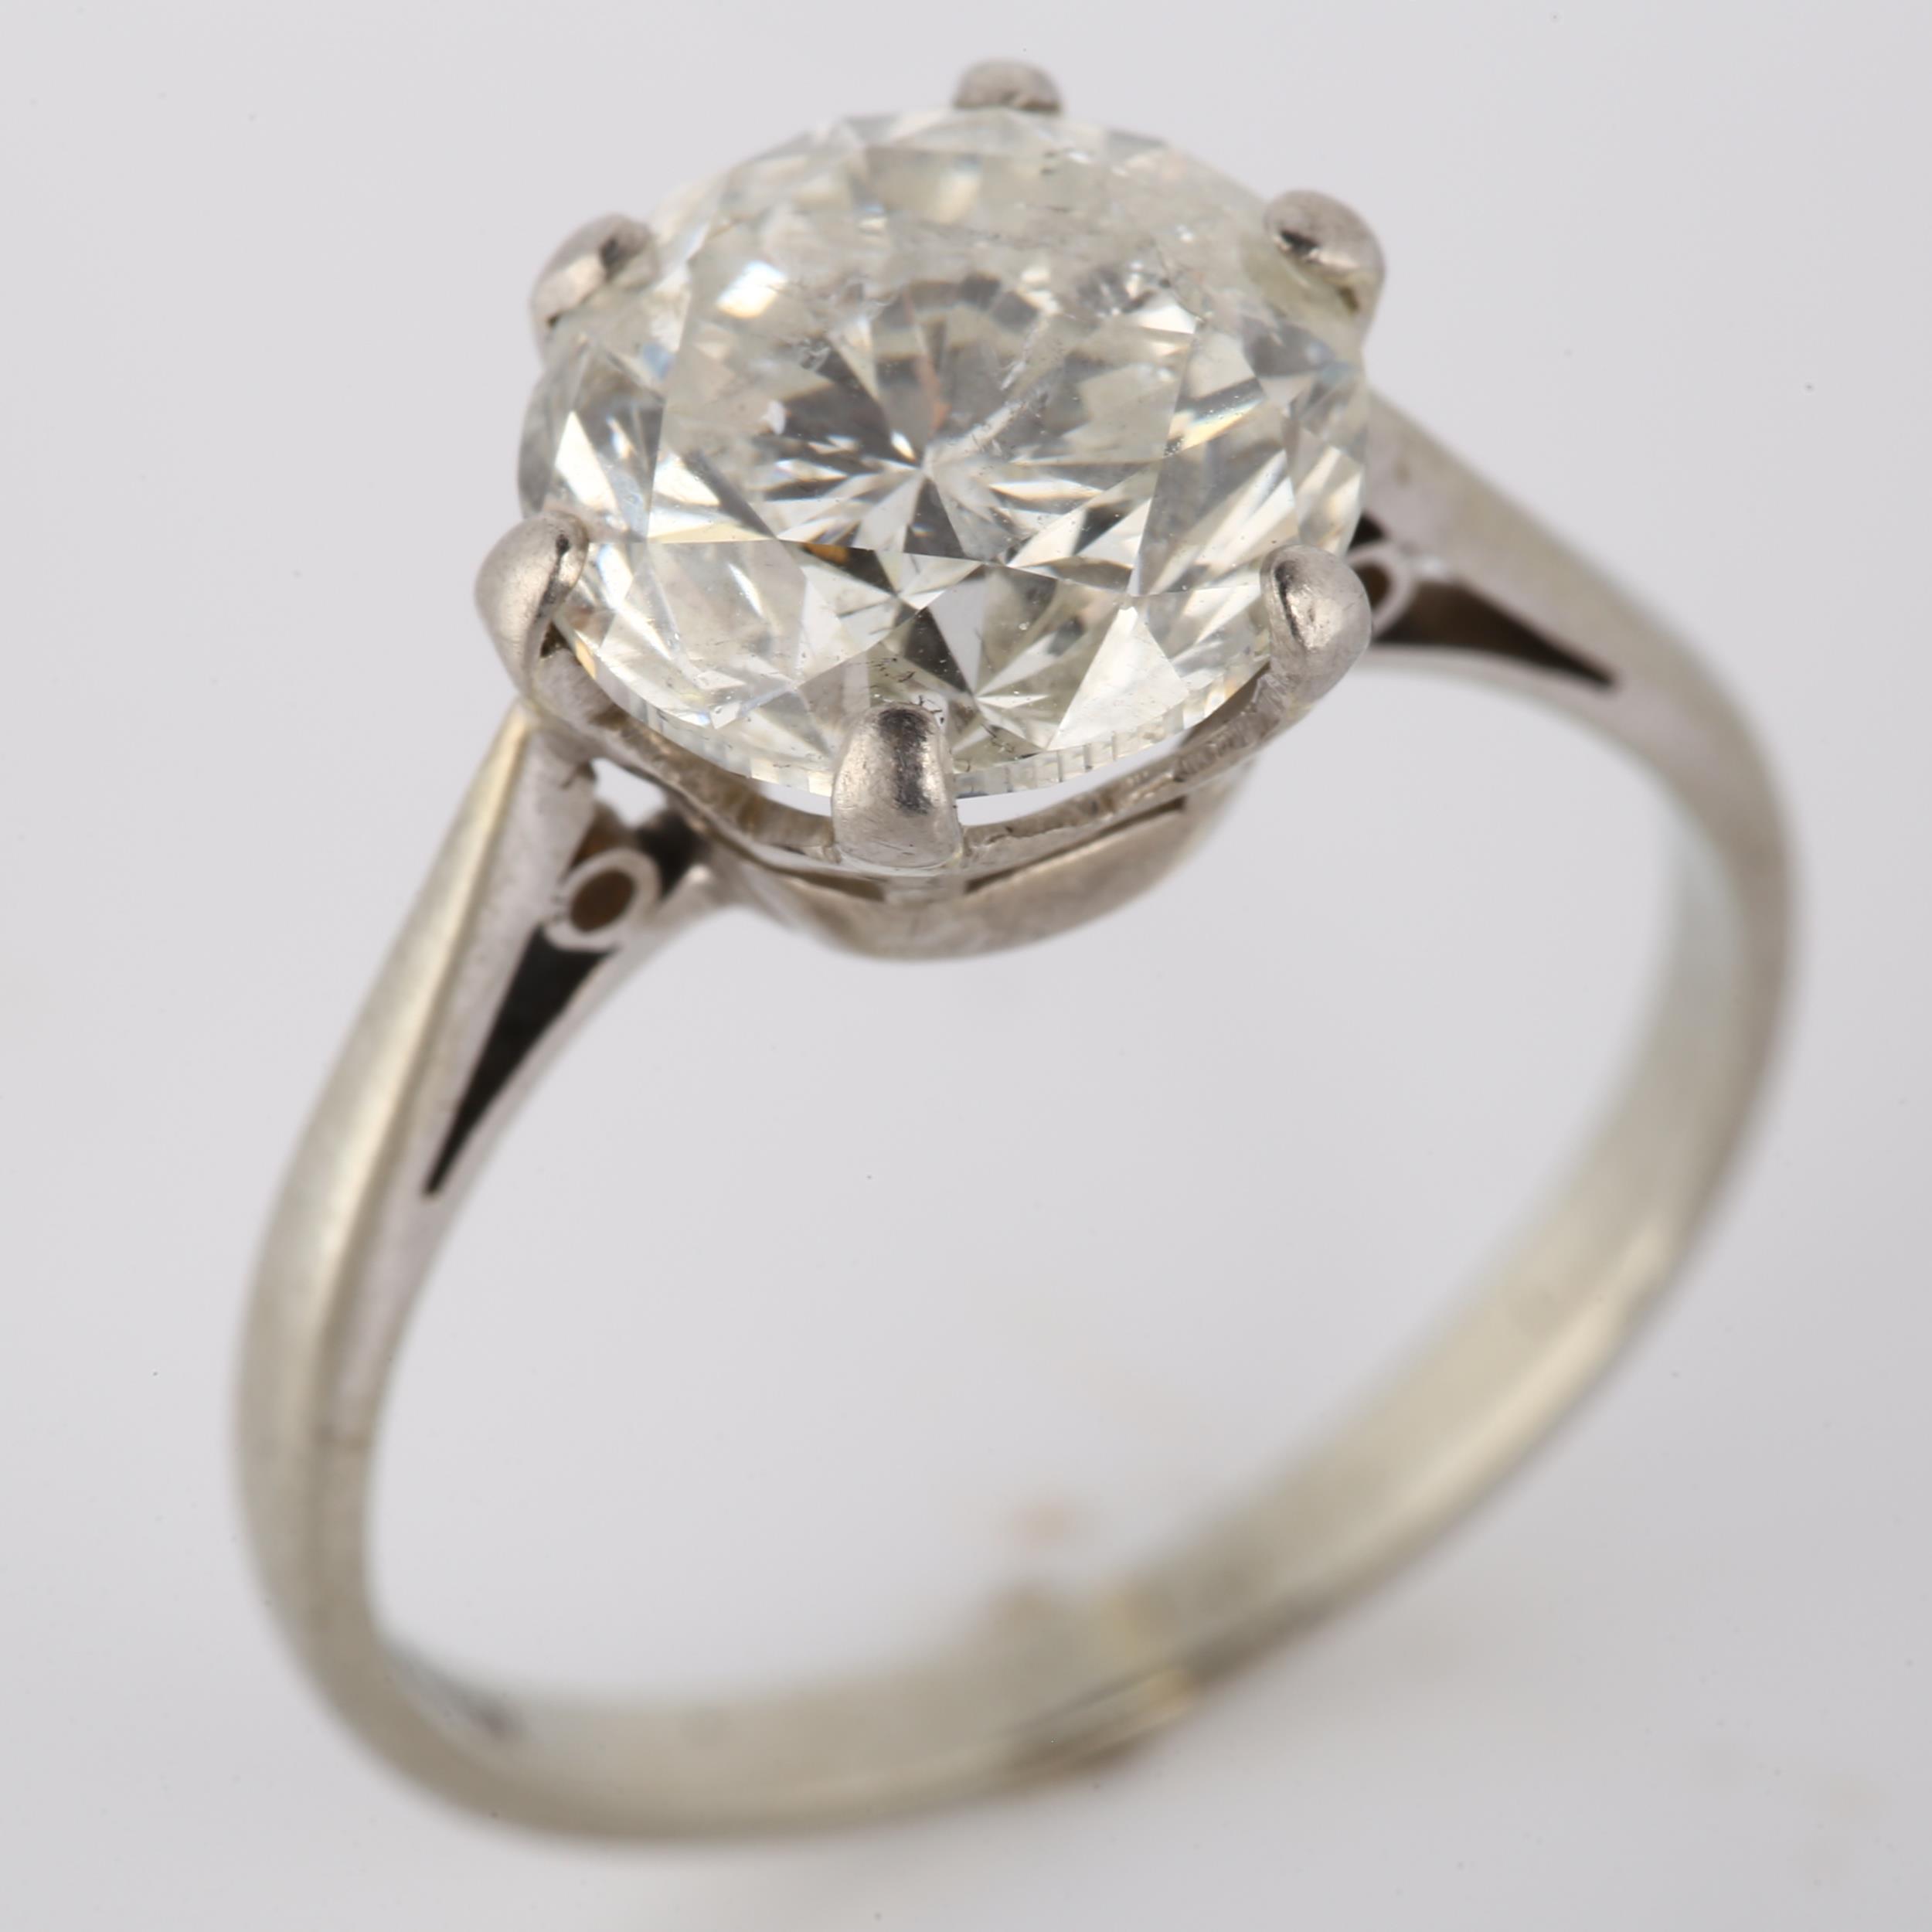 A 3.04ct solitaire diamond ring, 18ct white gold and platinum settings with modern round brilliant- - Image 2 of 4